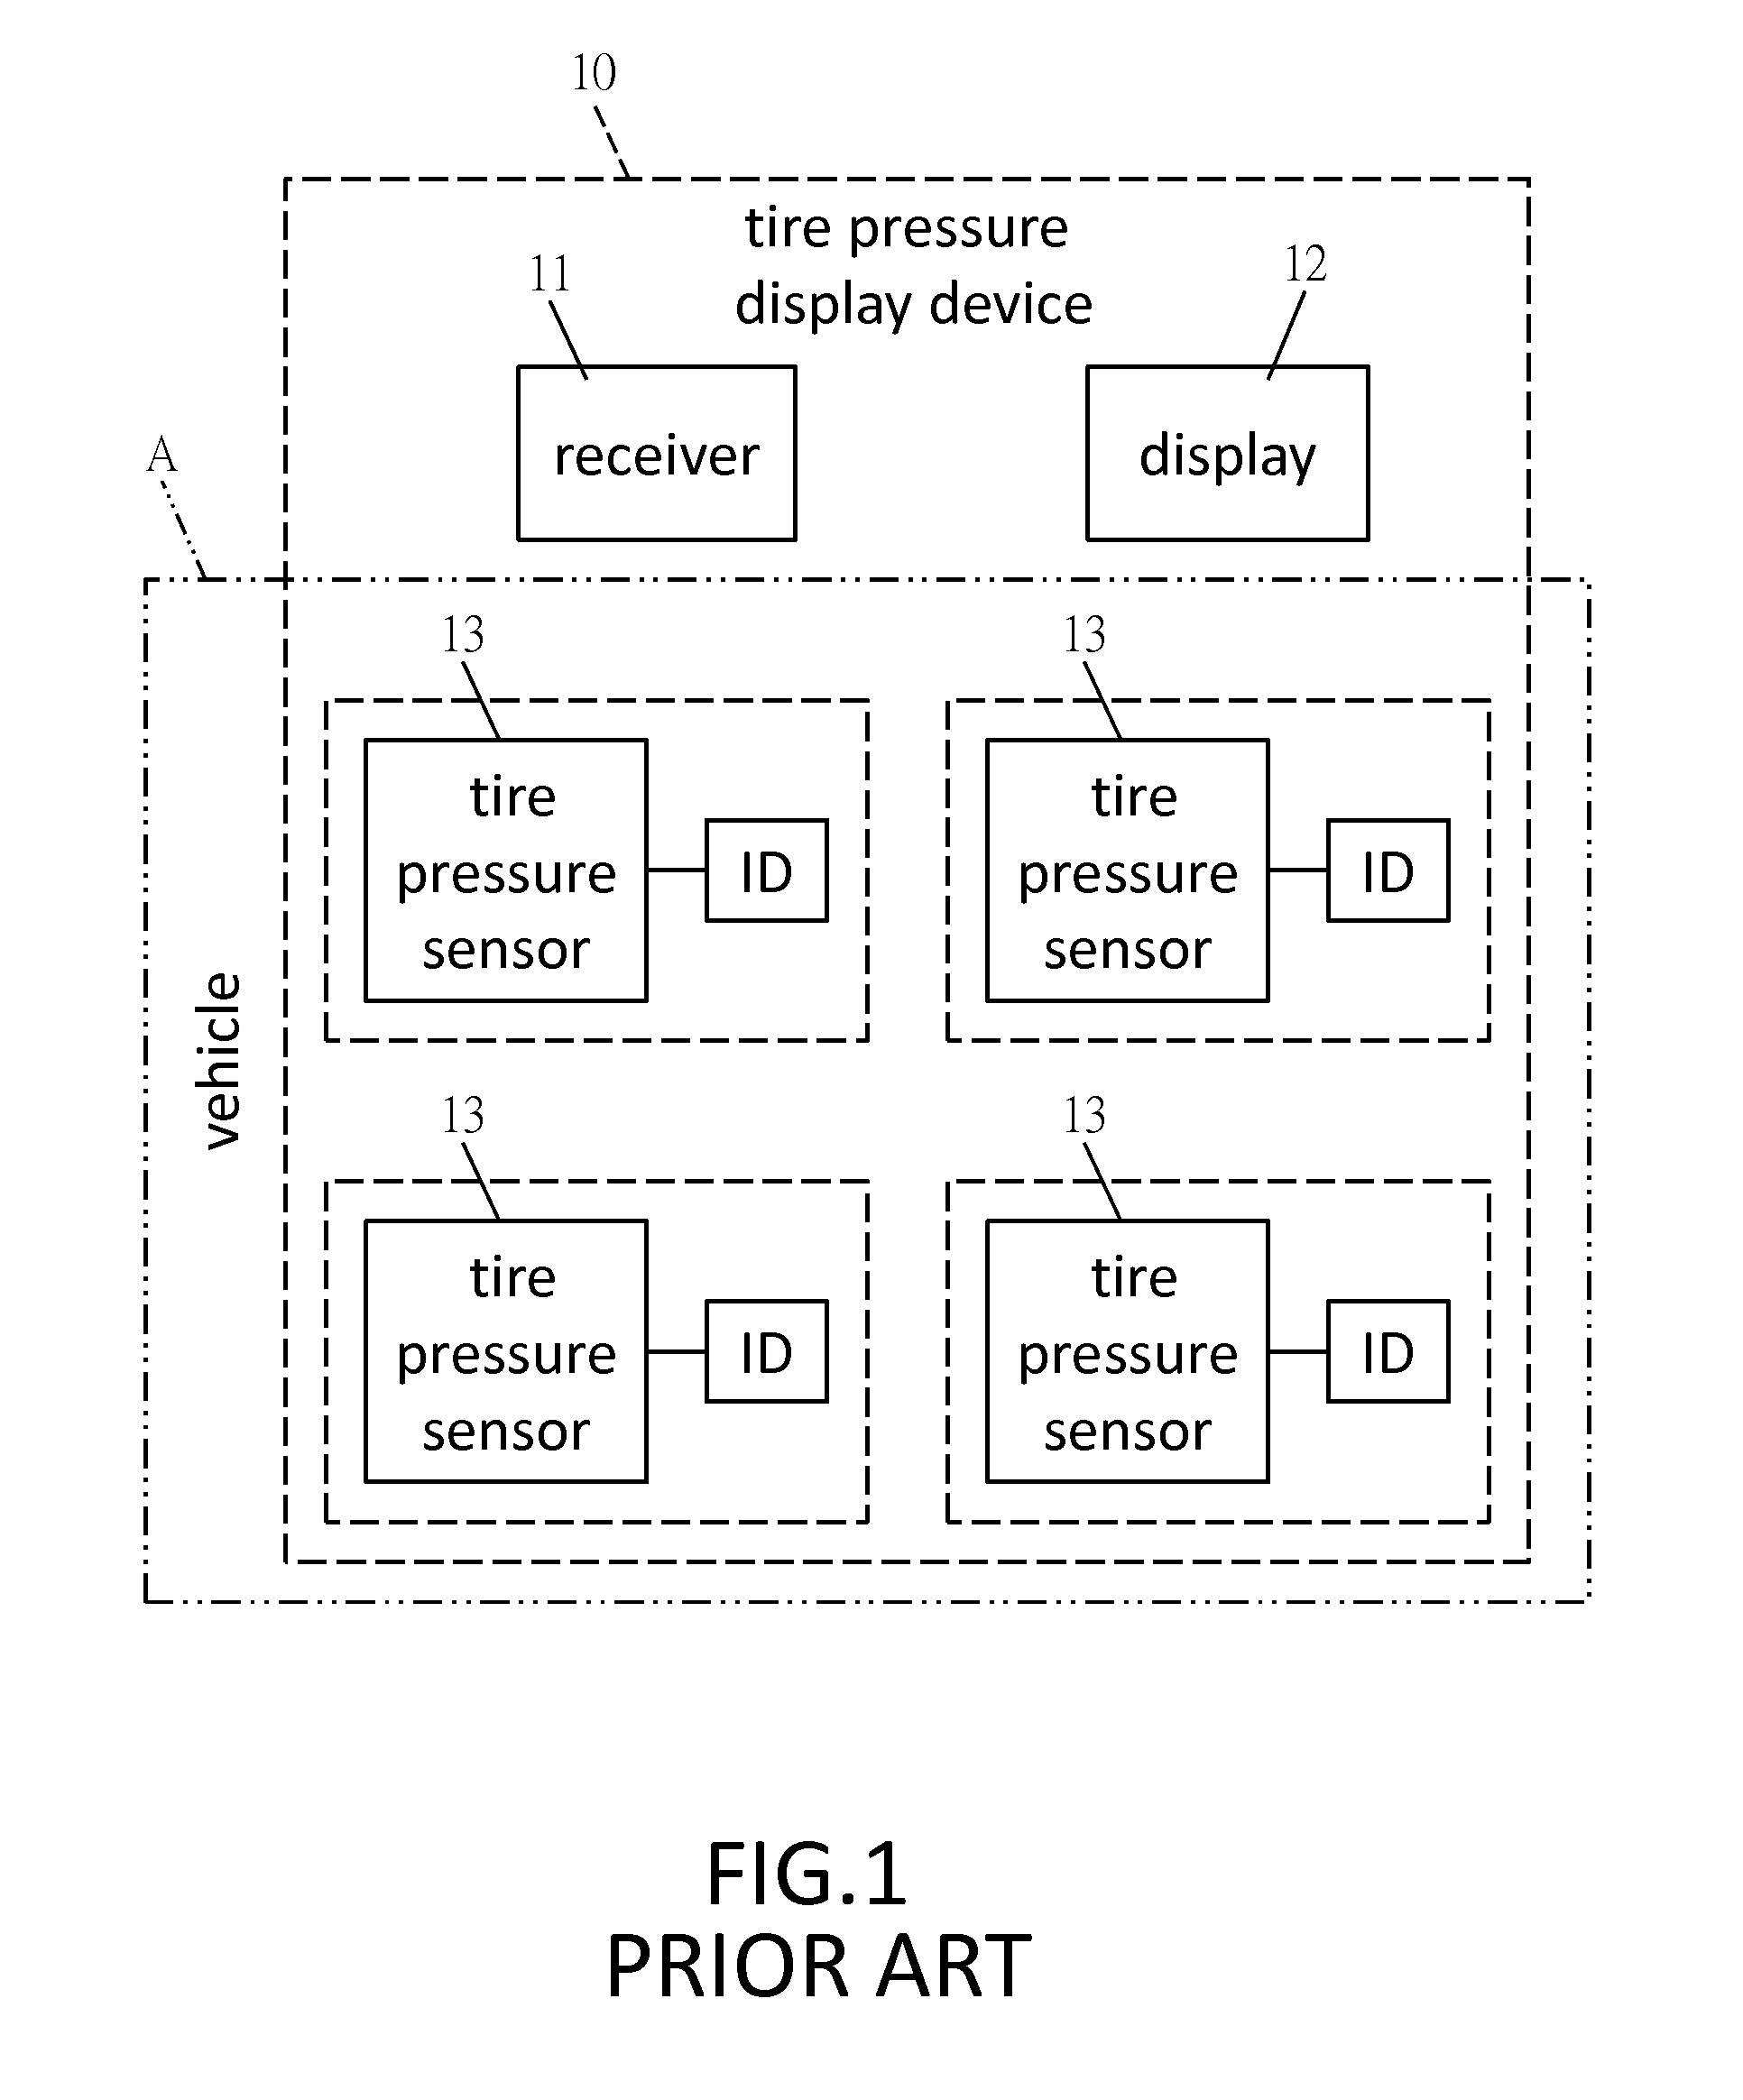 Method for correcting ID codes after installation of tire pressure sensors on a vehicle